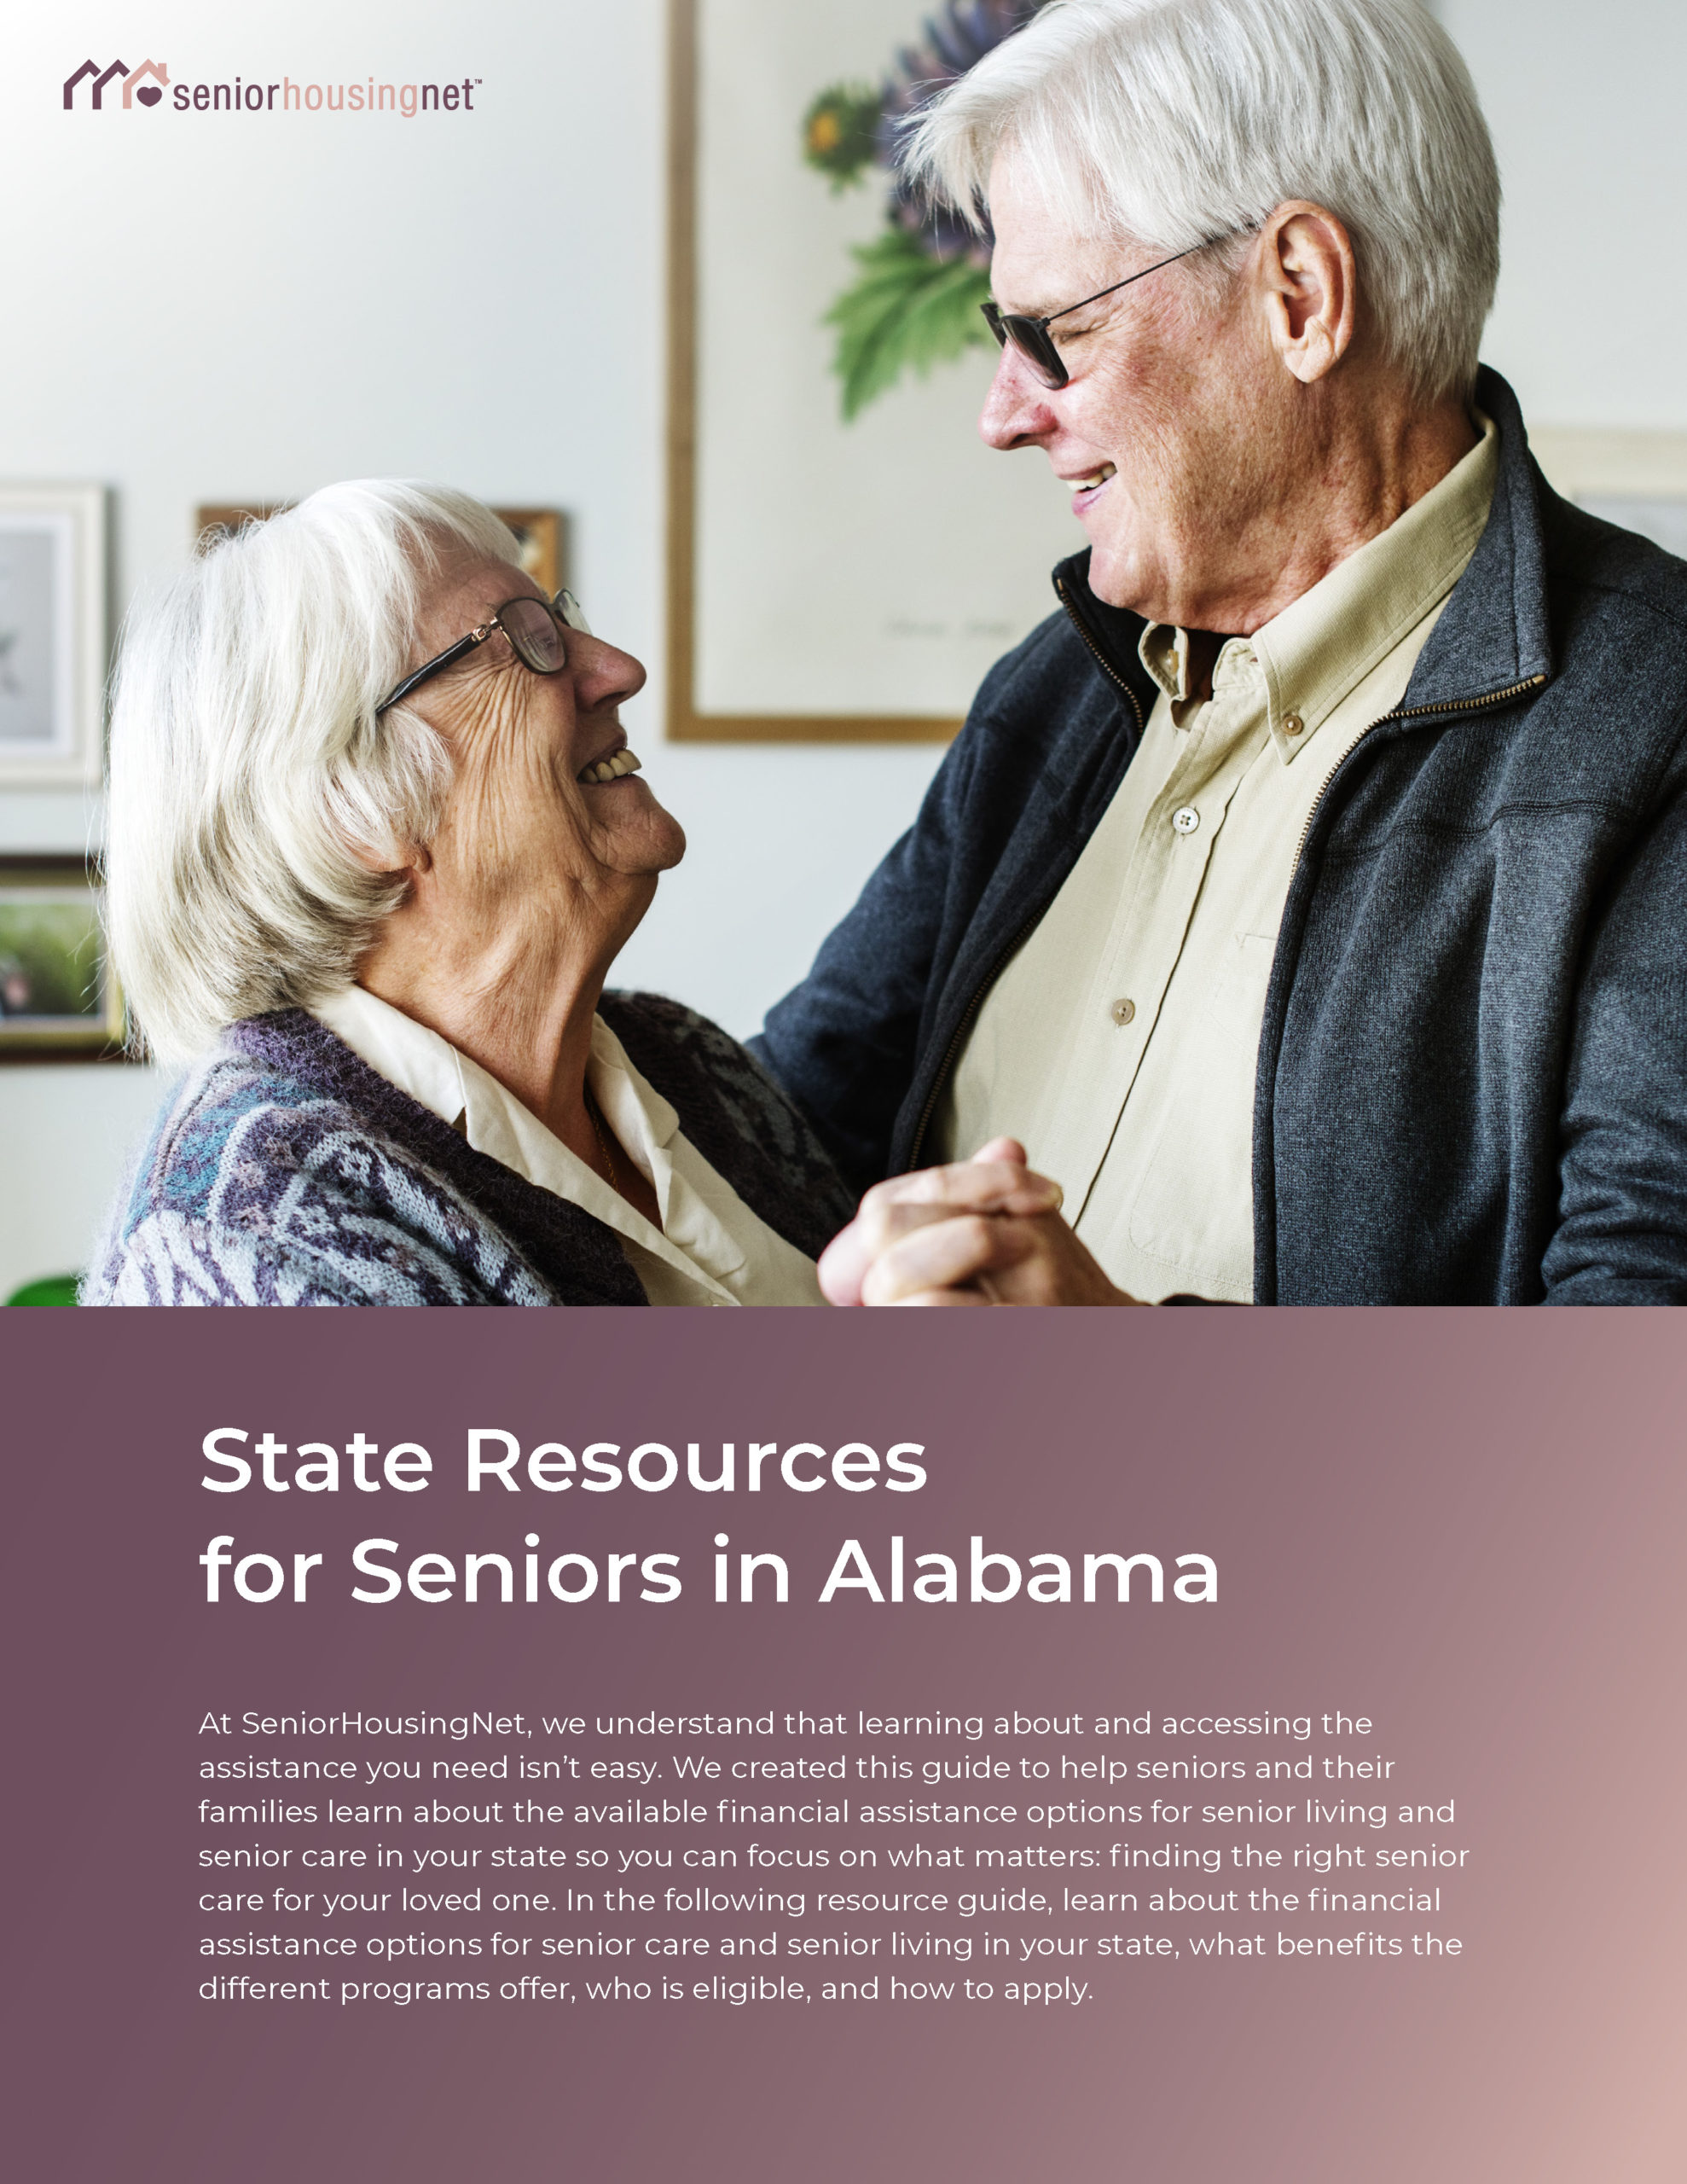 State Resources for Seniors in Alabama